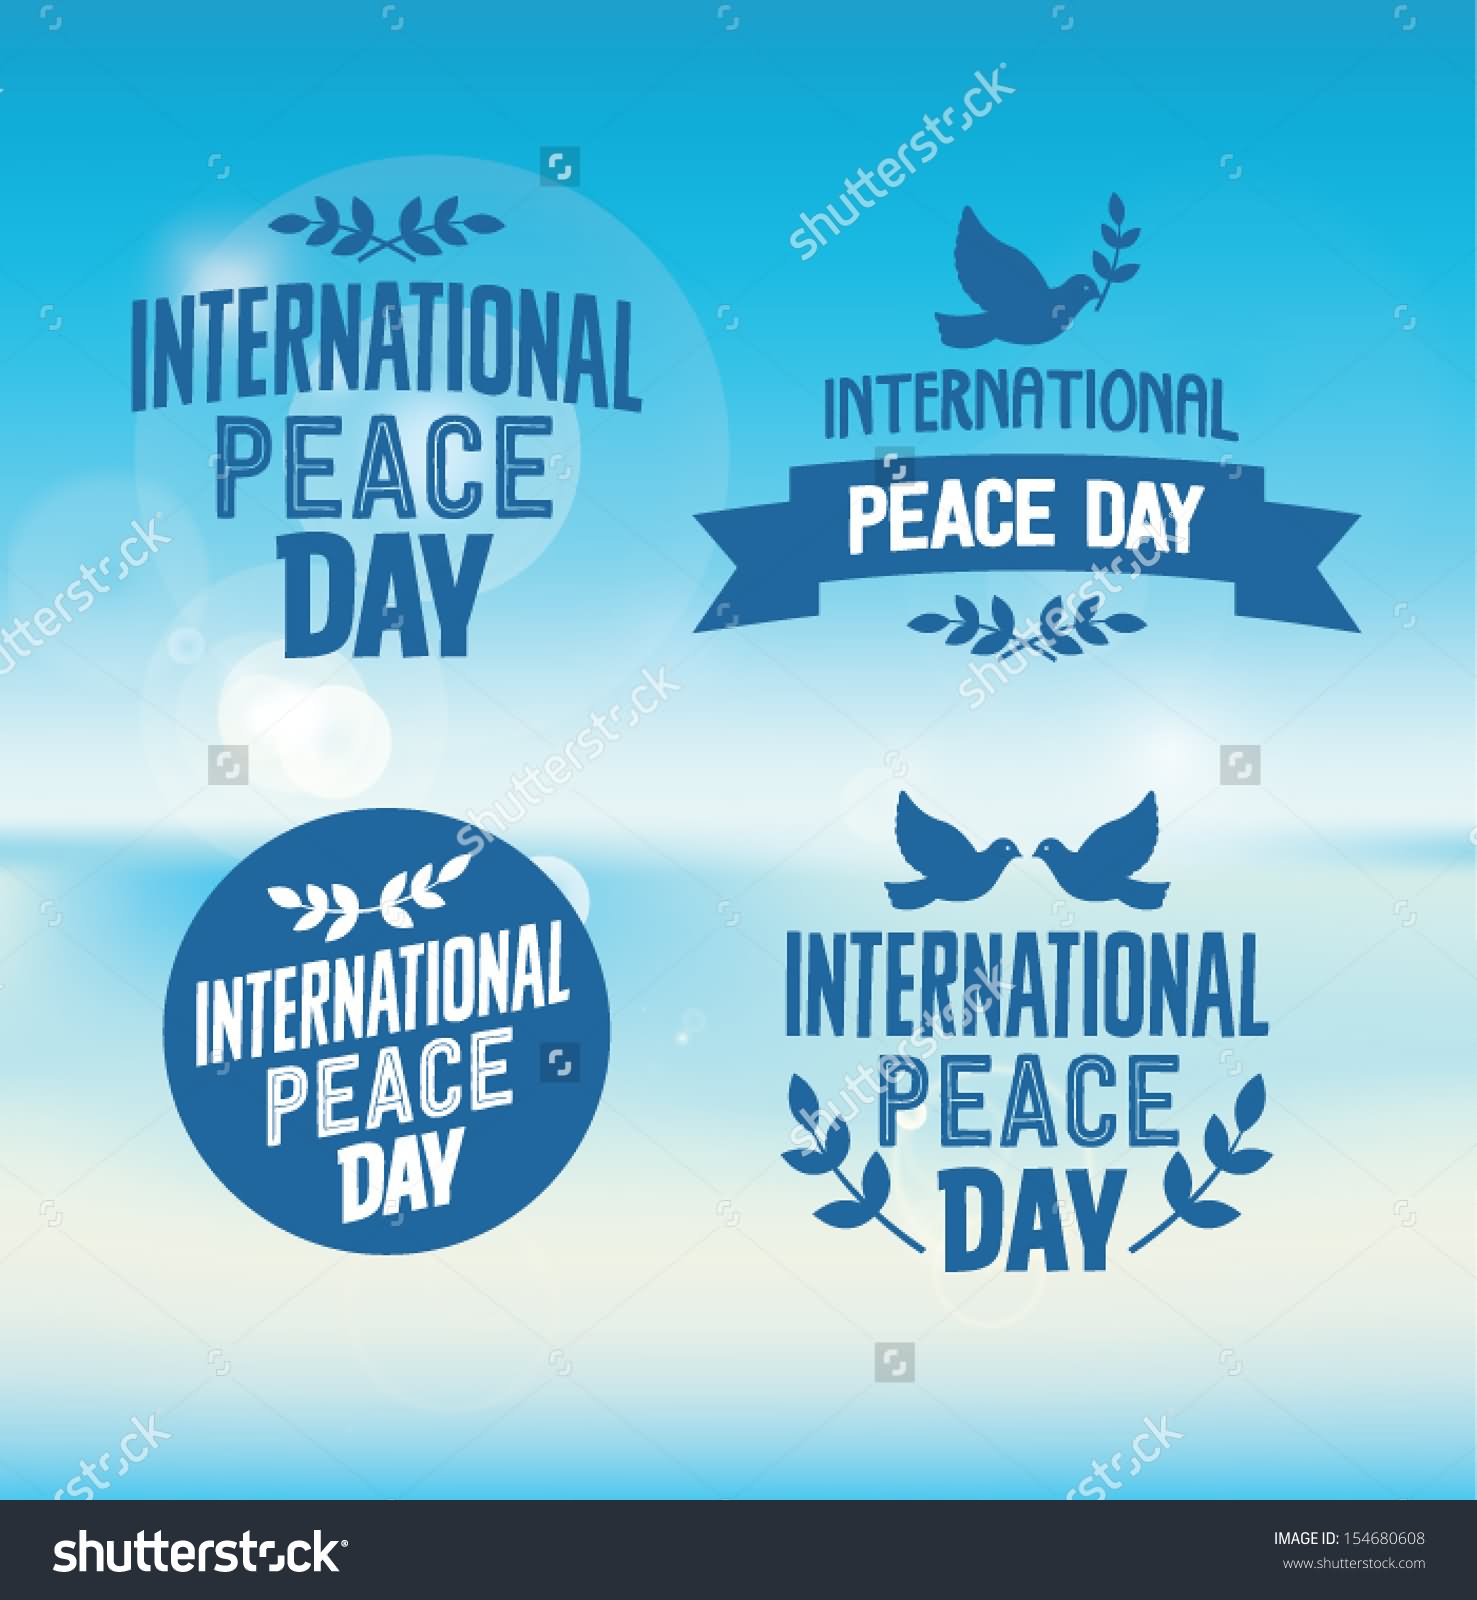 International Day of Peace Doves And Olive Branches Picture